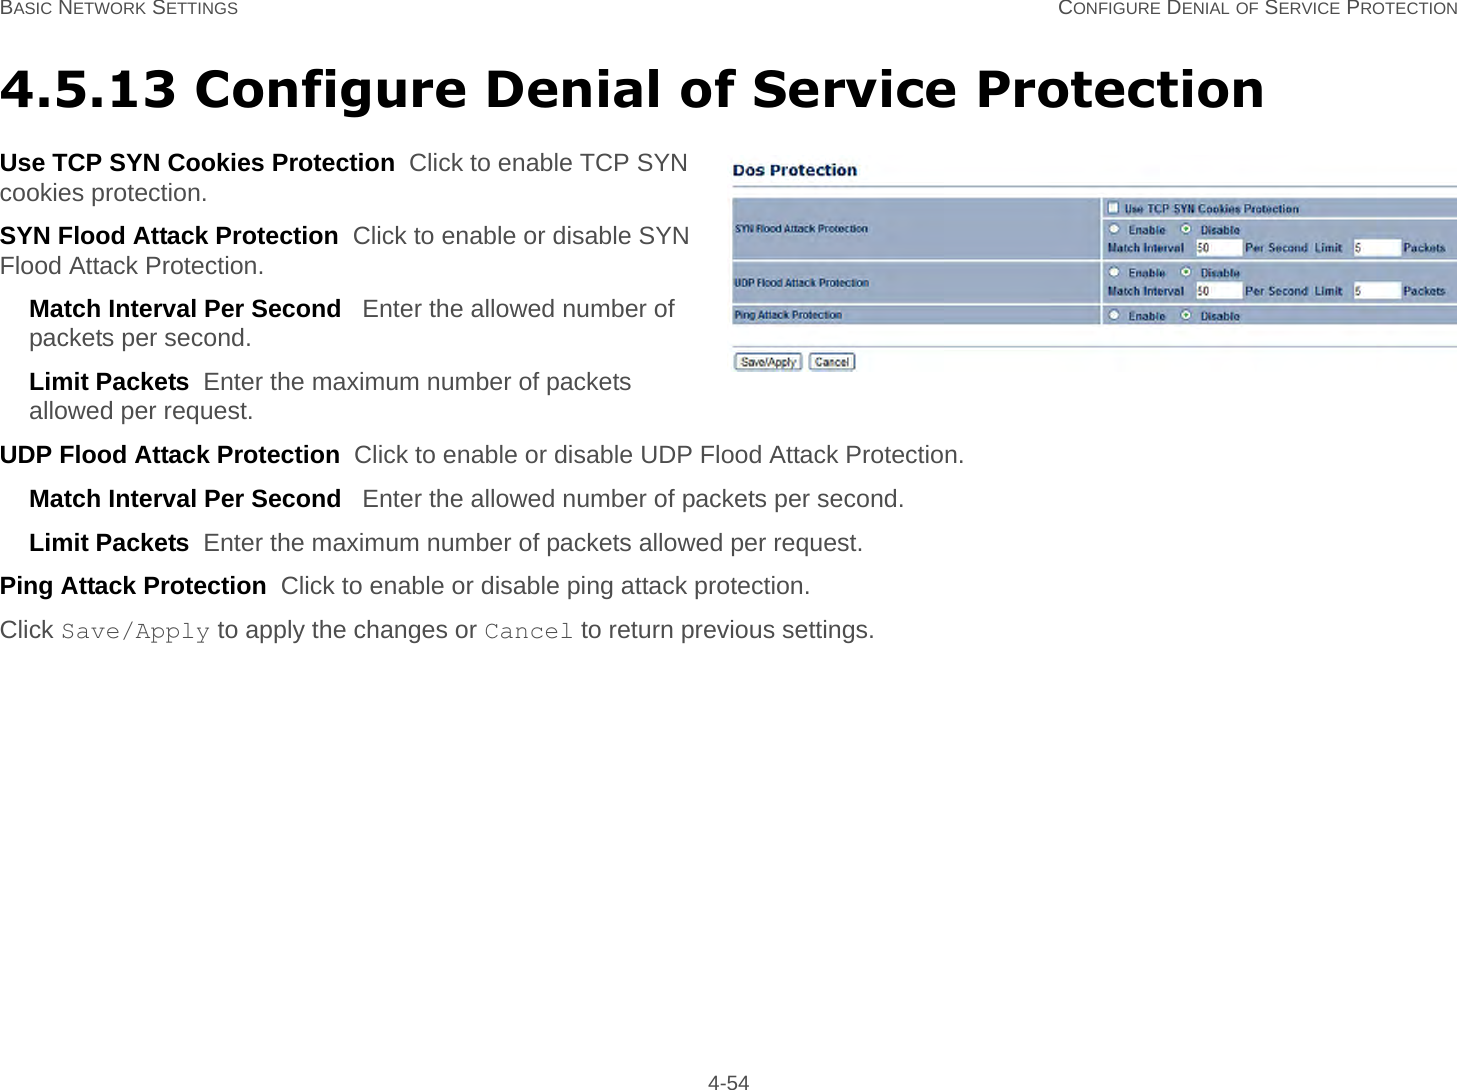 BASIC NETWORK SETTINGS CONFIGURE DENIAL OF SERVICE PROTECTION 4-544.5.13 Configure Denial of Service ProtectionUse TCP SYN Cookies Protection  Click to enable TCP SYN cookies protection.SYN Flood Attack Protection  Click to enable or disable SYN Flood Attack Protection.Match Interval Per Second   Enter the allowed number of packets per second.Limit Packets  Enter the maximum number of packets allowed per request.UDP Flood Attack Protection  Click to enable or disable UDP Flood Attack Protection.Match Interval Per Second   Enter the allowed number of packets per second.Limit Packets  Enter the maximum number of packets allowed per request.Ping Attack Protection  Click to enable or disable ping attack protection.Click Save/Apply to apply the changes or Cancel to return previous settings.